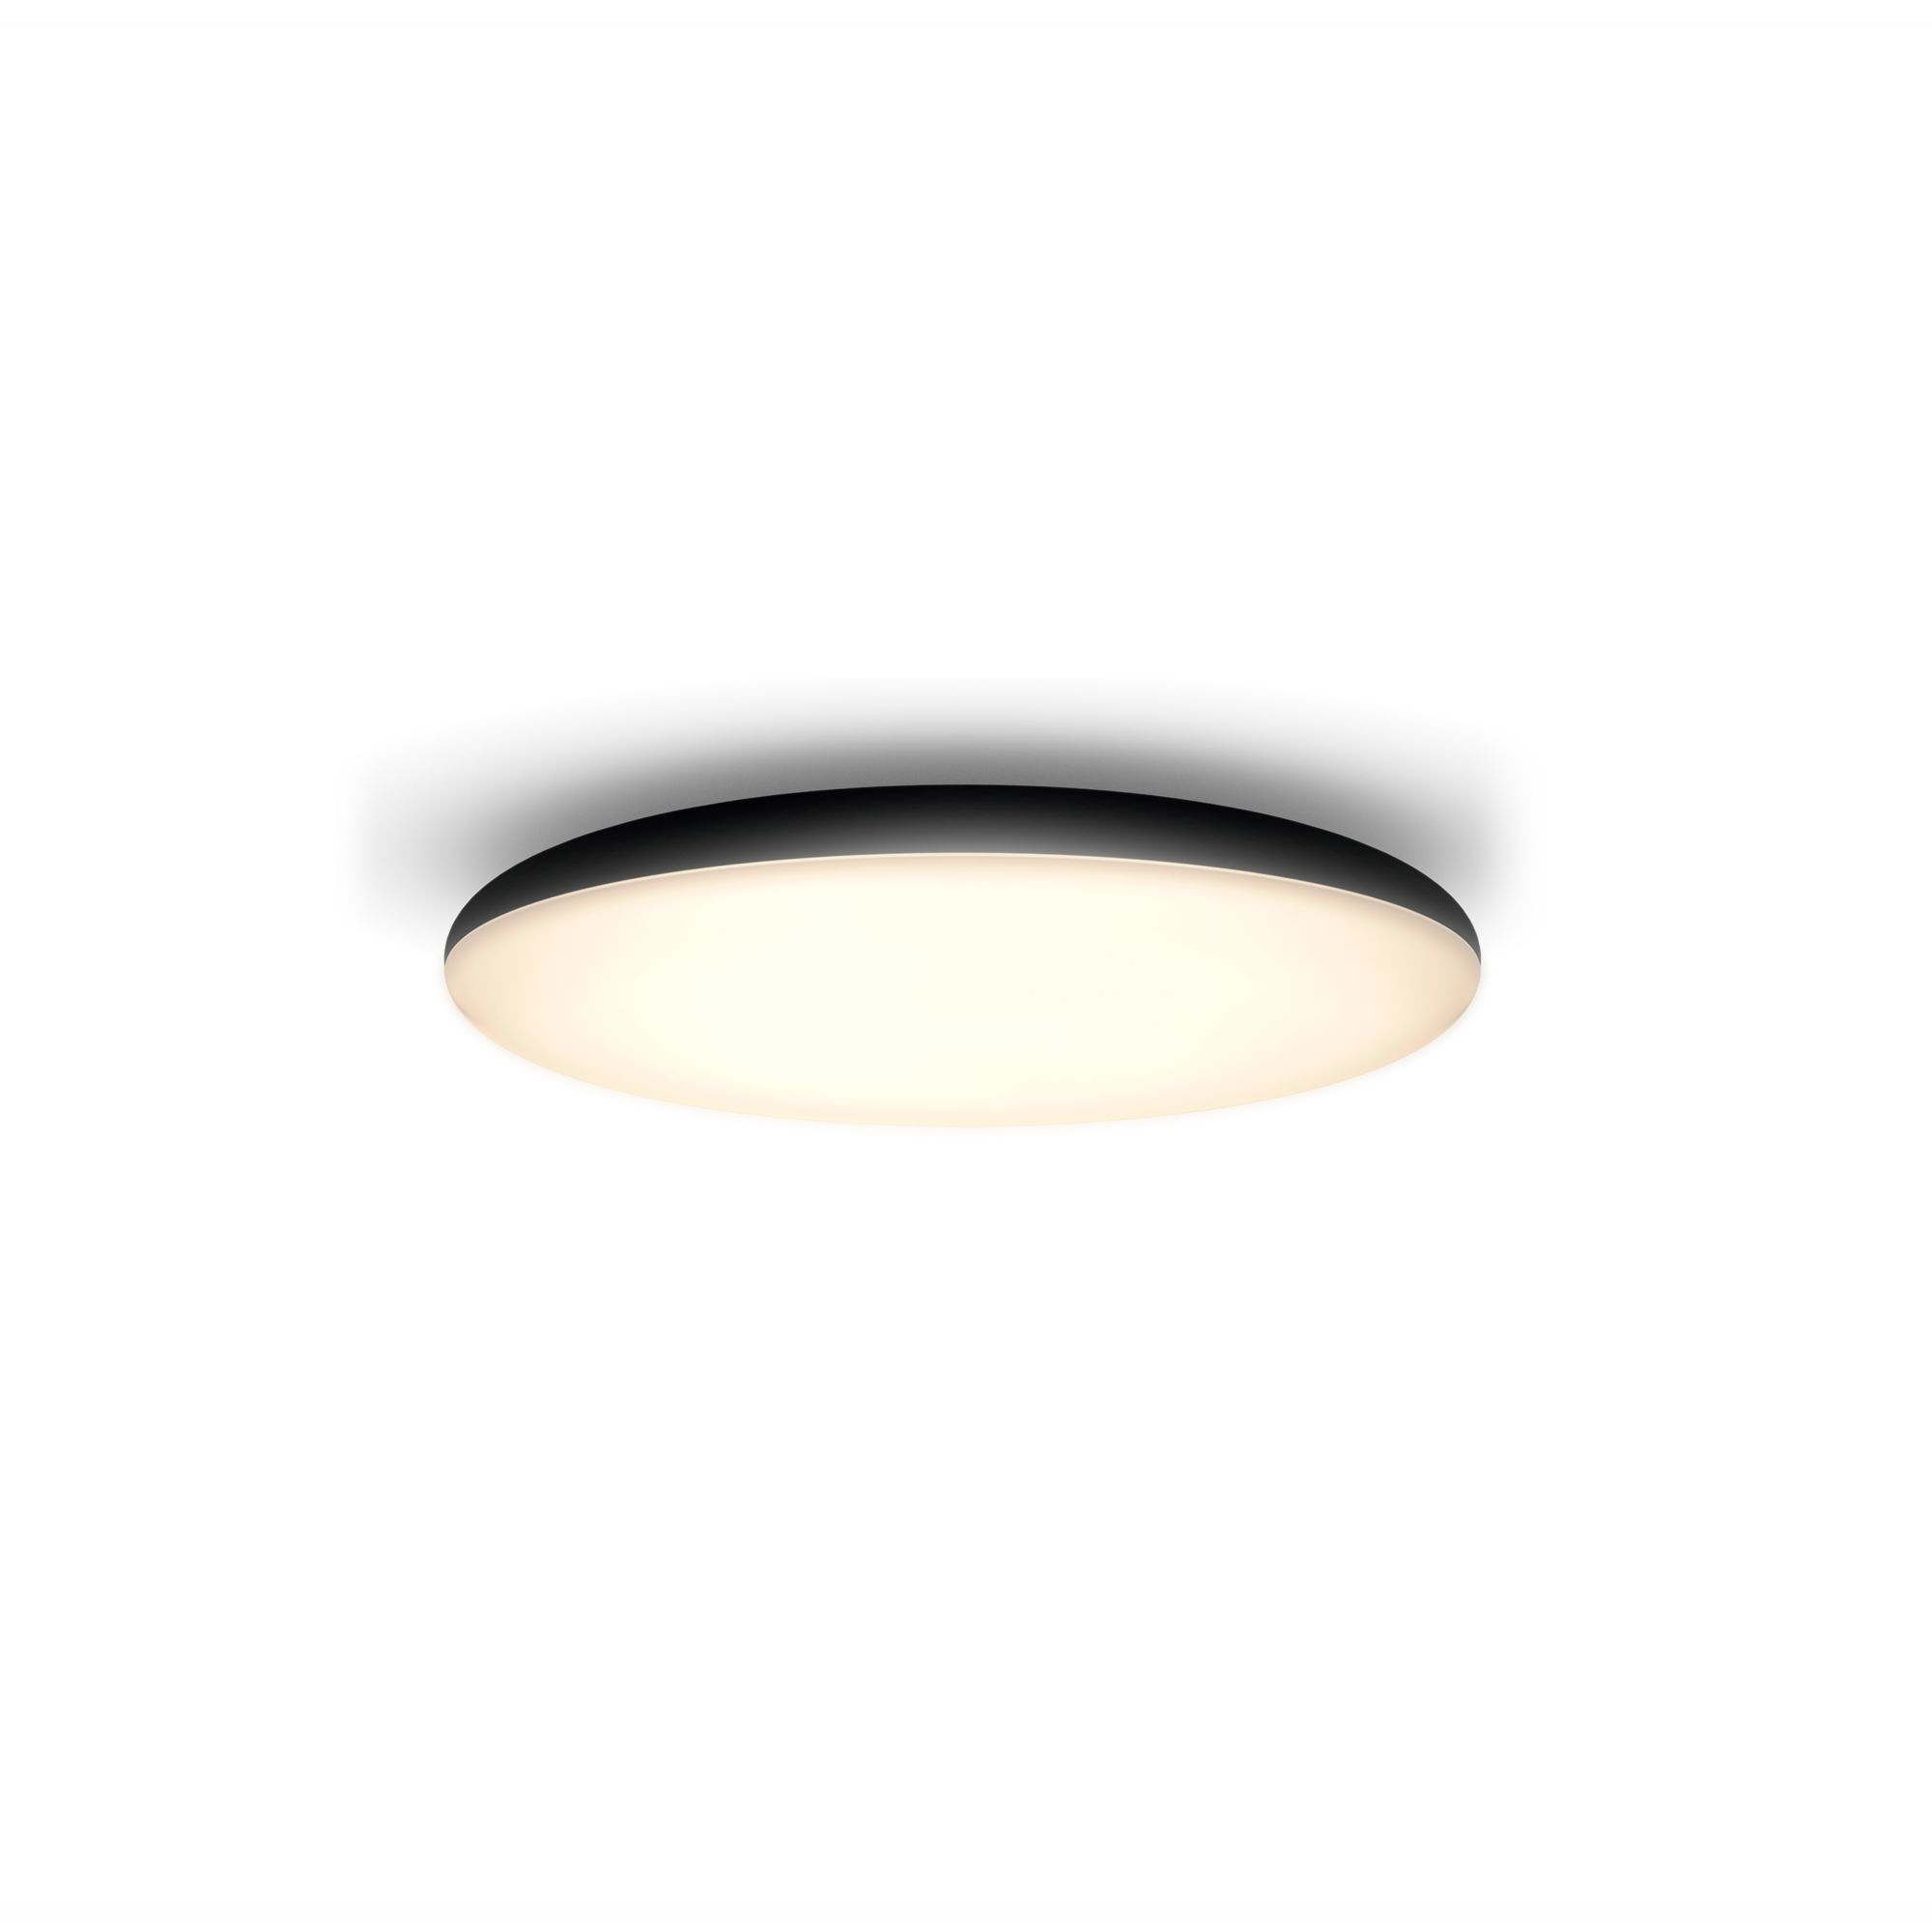 Philips by Signify Cher plafondlamp